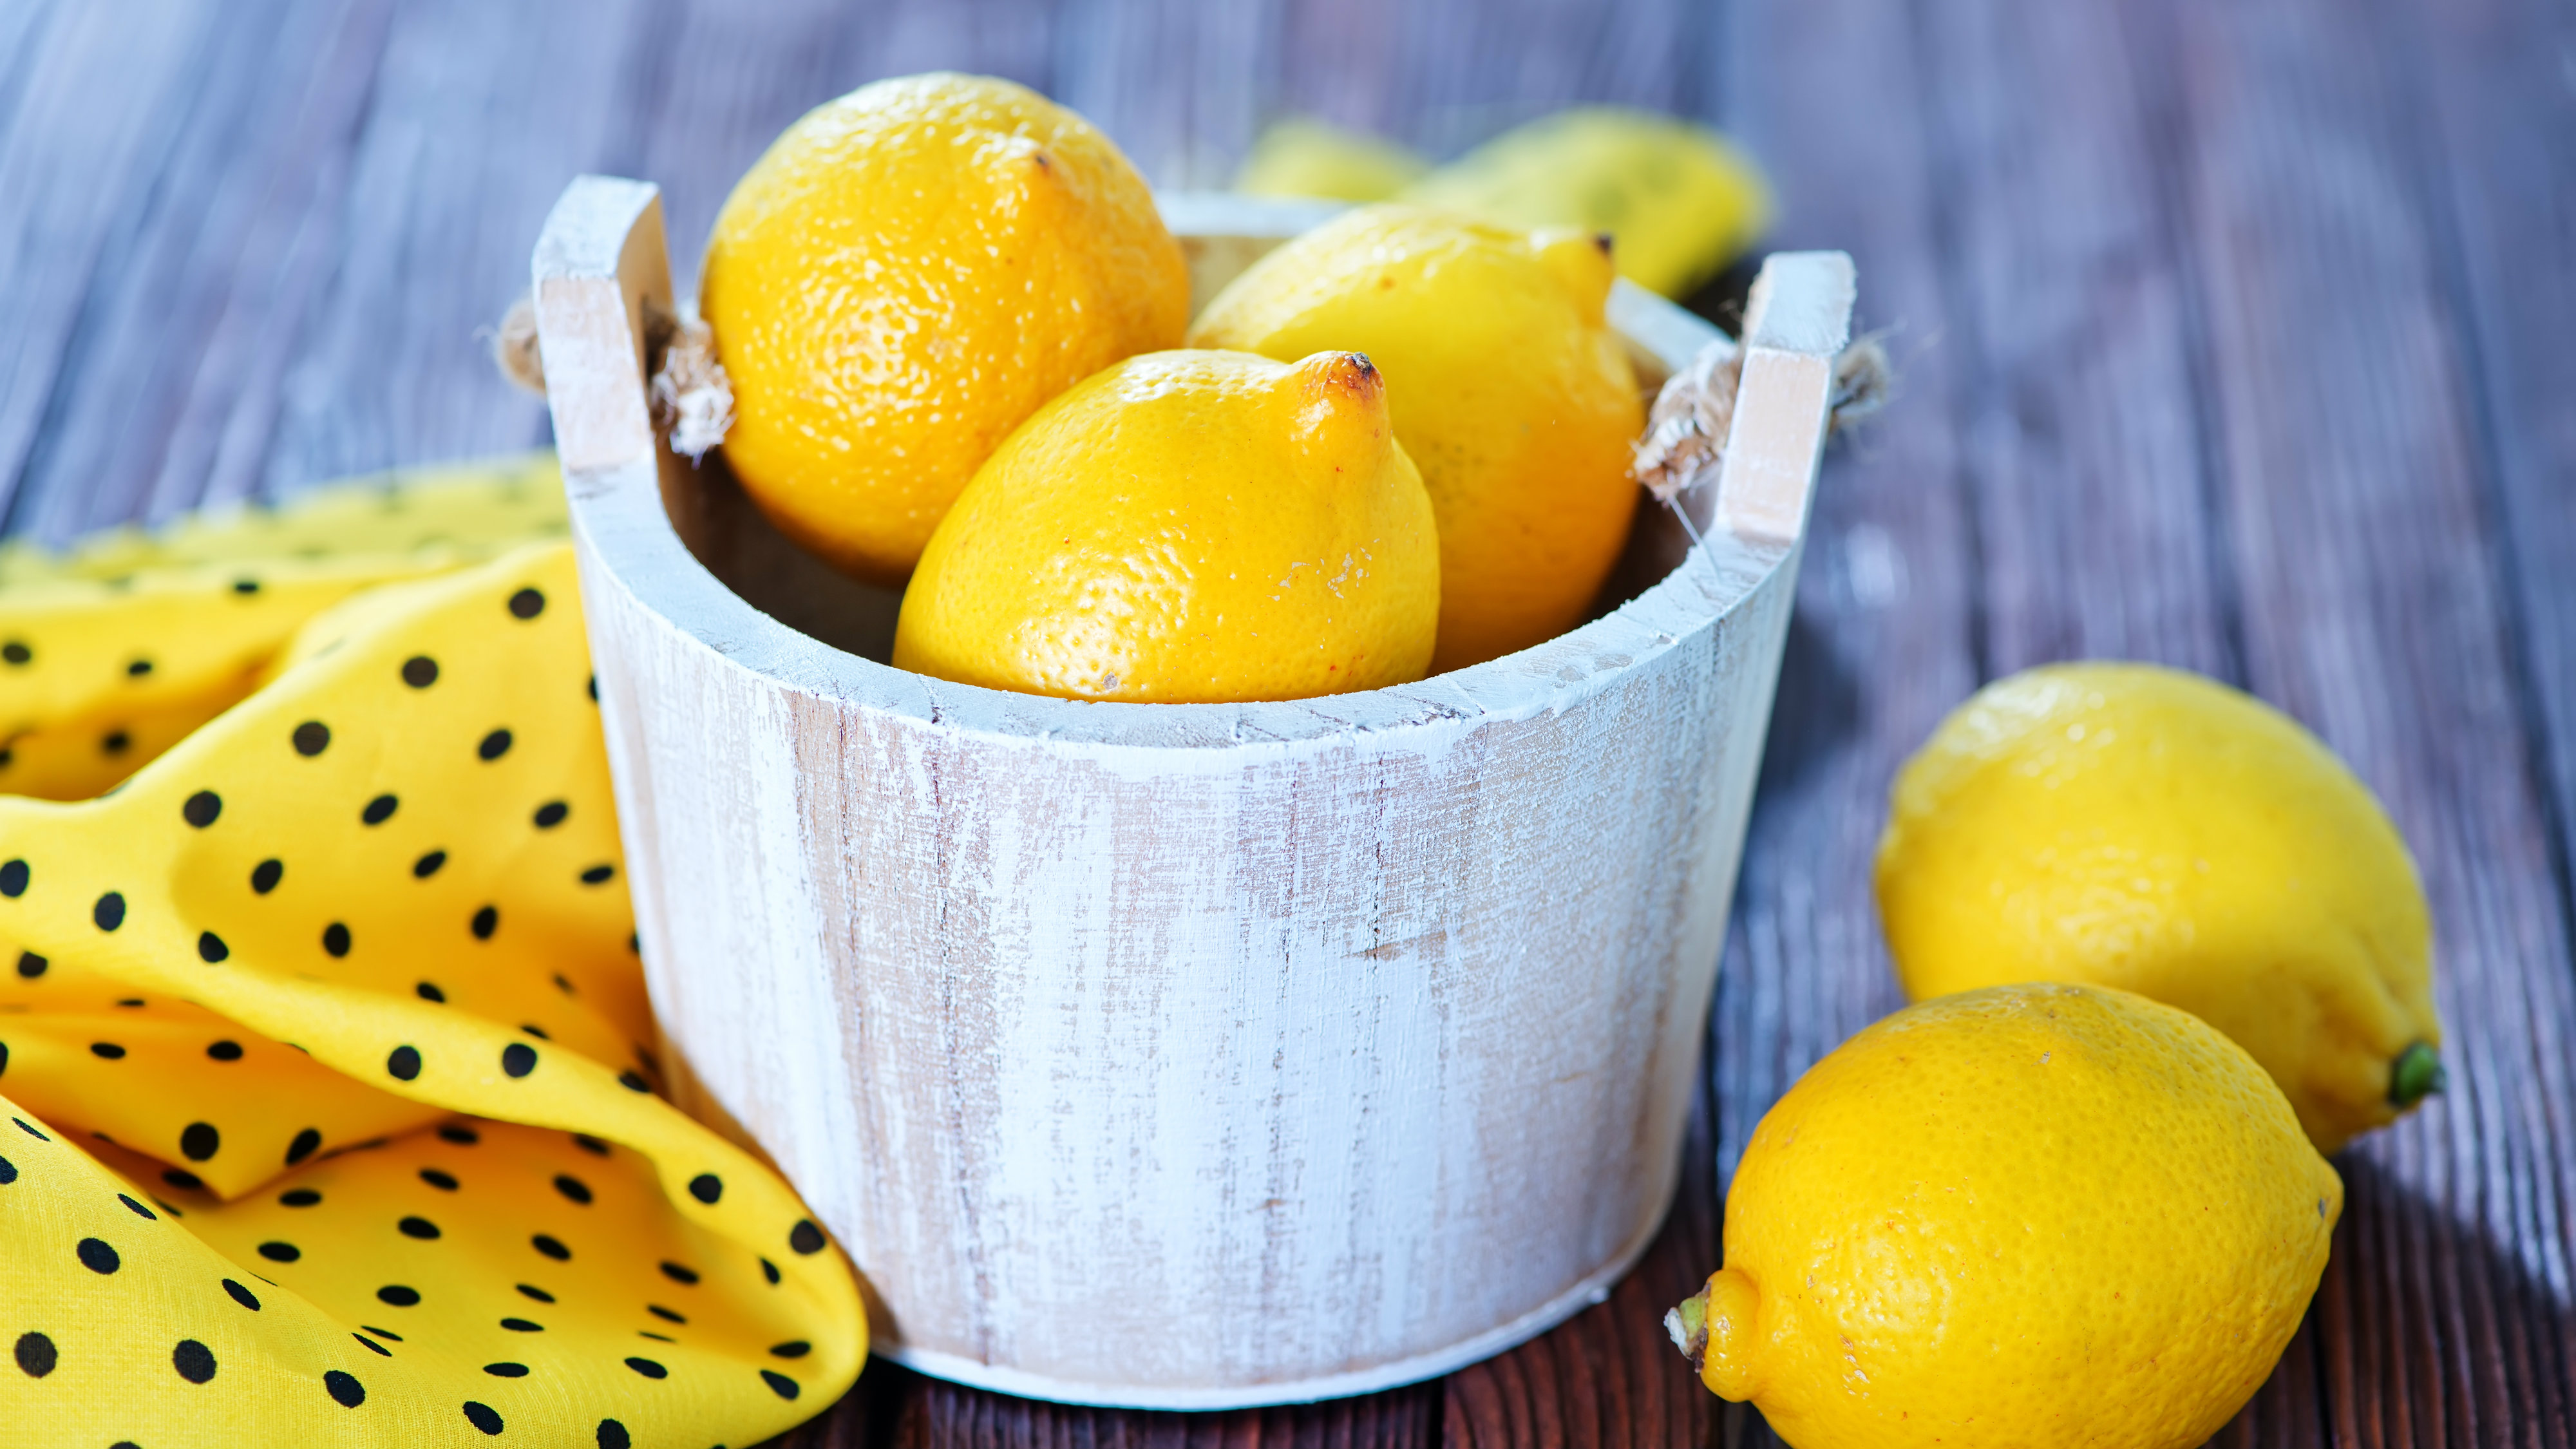 Why You Need More Lemon in Your Life